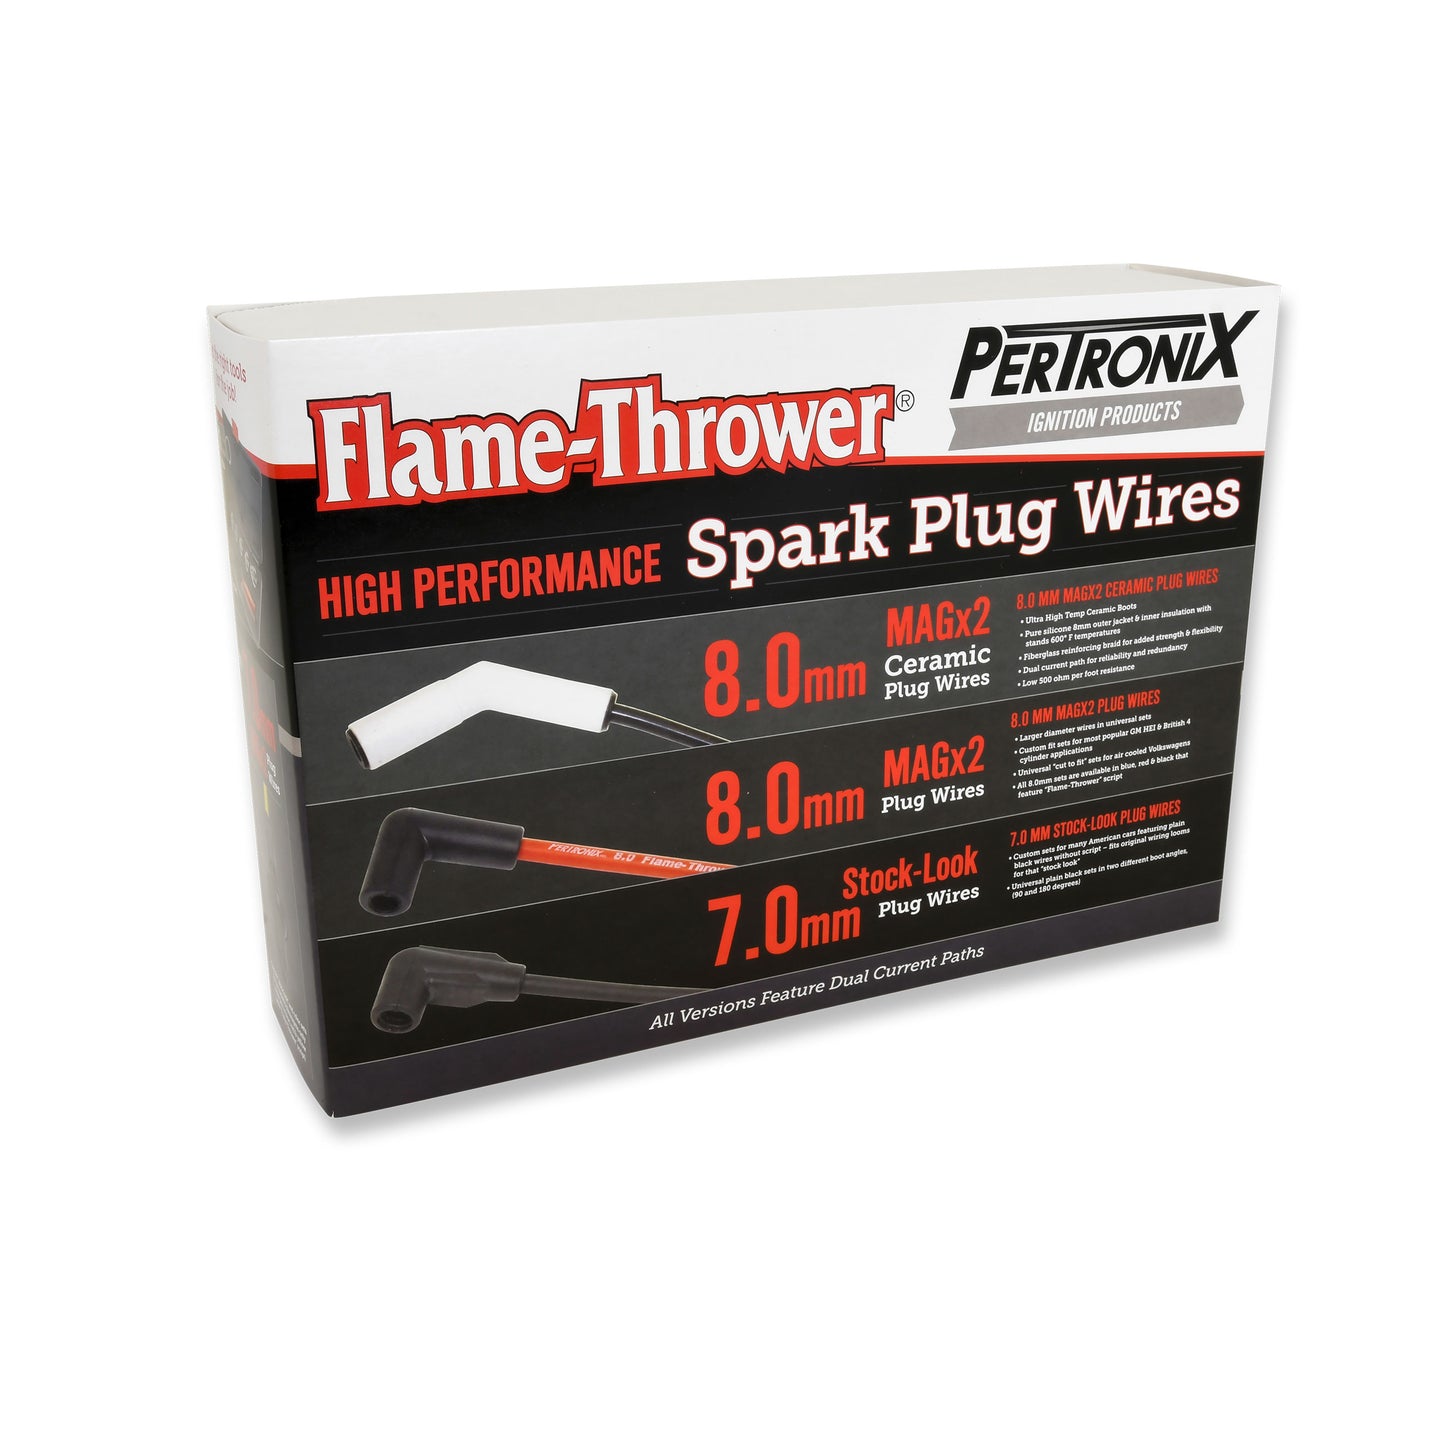 PerTronix 808216 Flame-Thrower Spark Plug Wires 8 cyl 8mm GM HEI Custom Fit Black